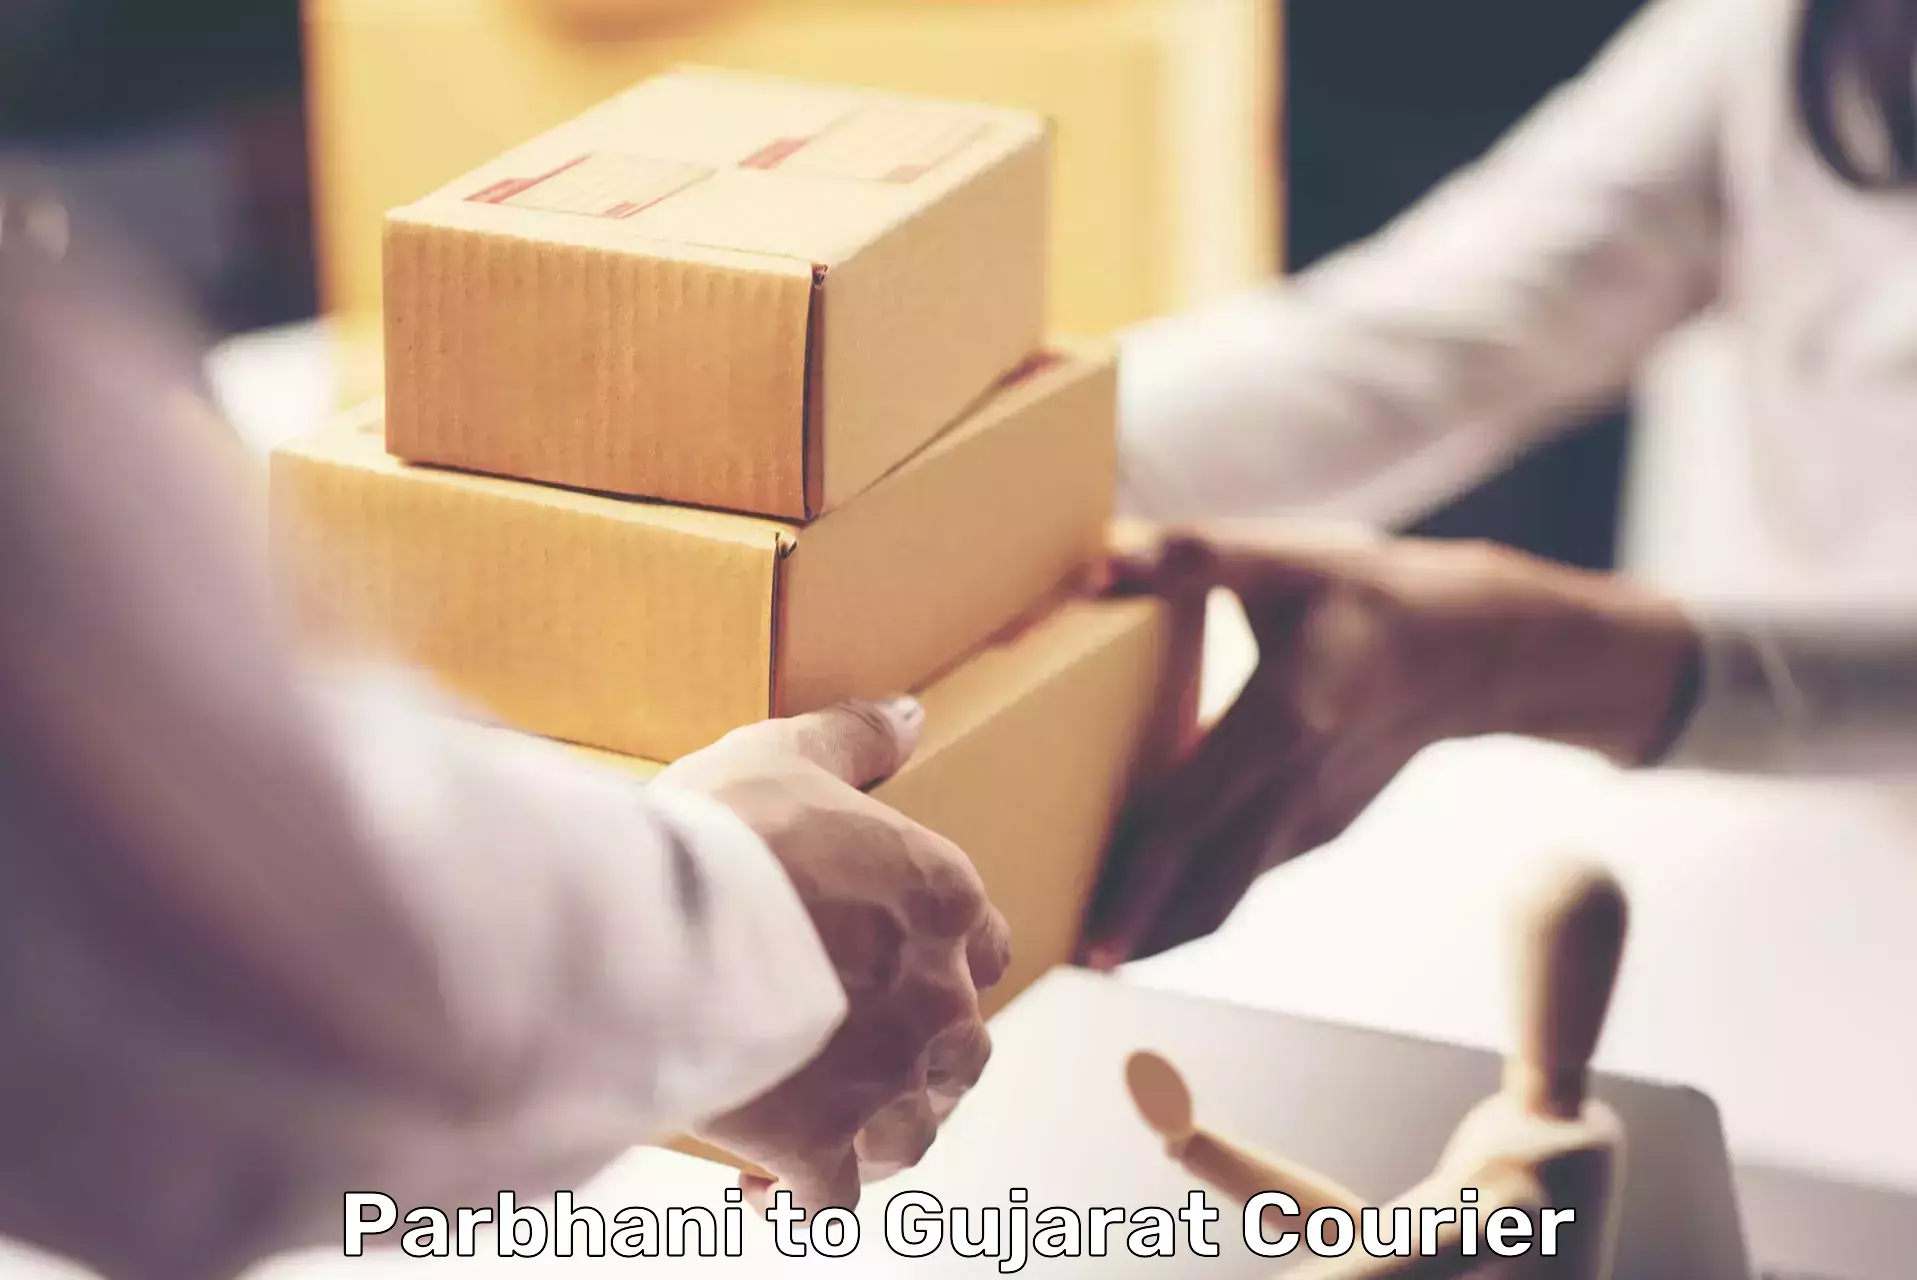 Customer-oriented courier services Parbhani to Prantij